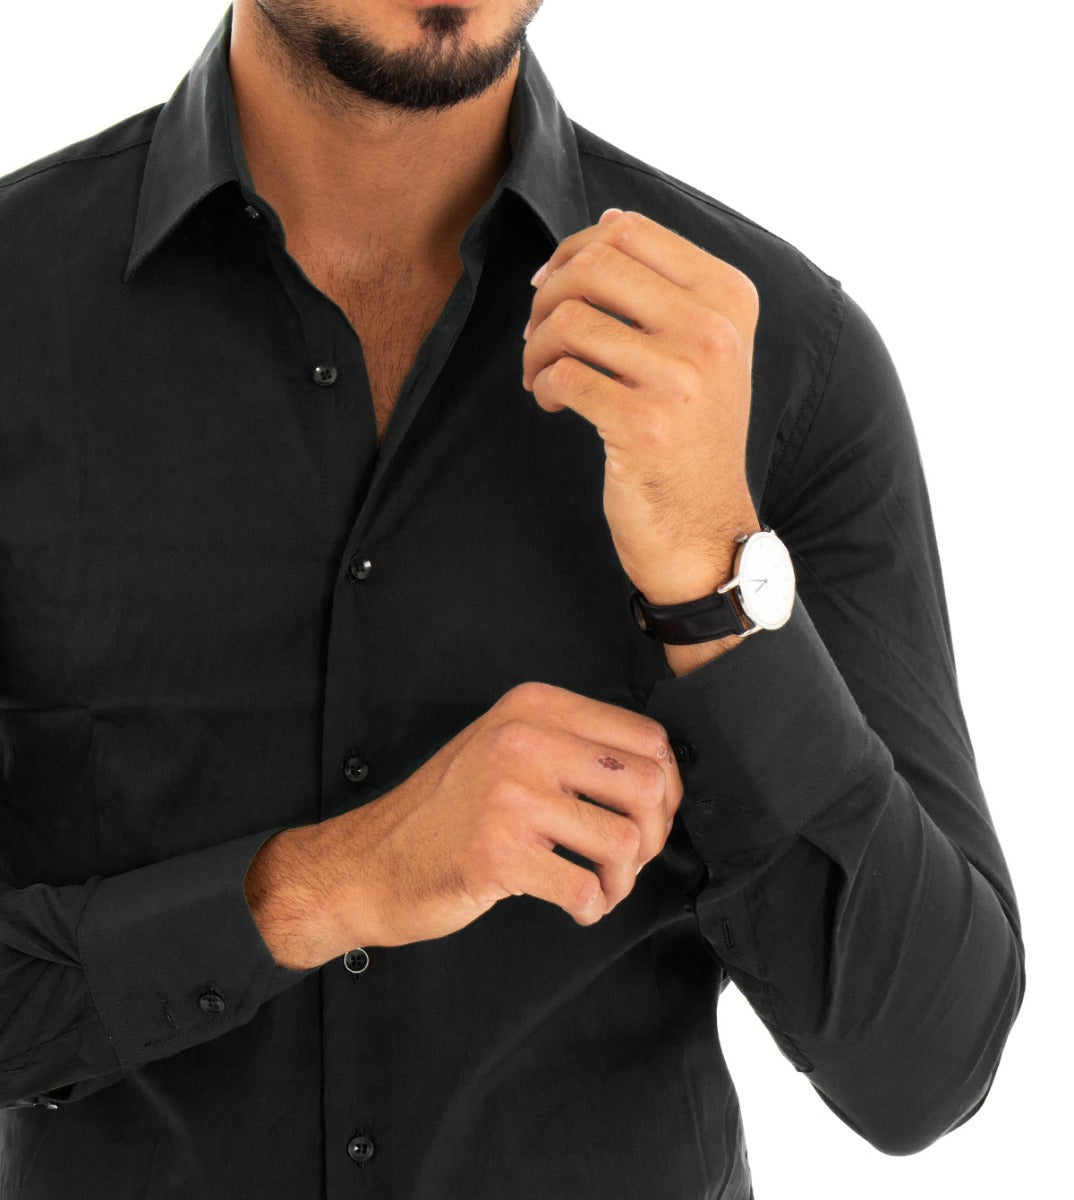 Men's Shirt With Collar Long Sleeve Slim Fit Basic Casual Black Cotton GIOSAL-C1810A